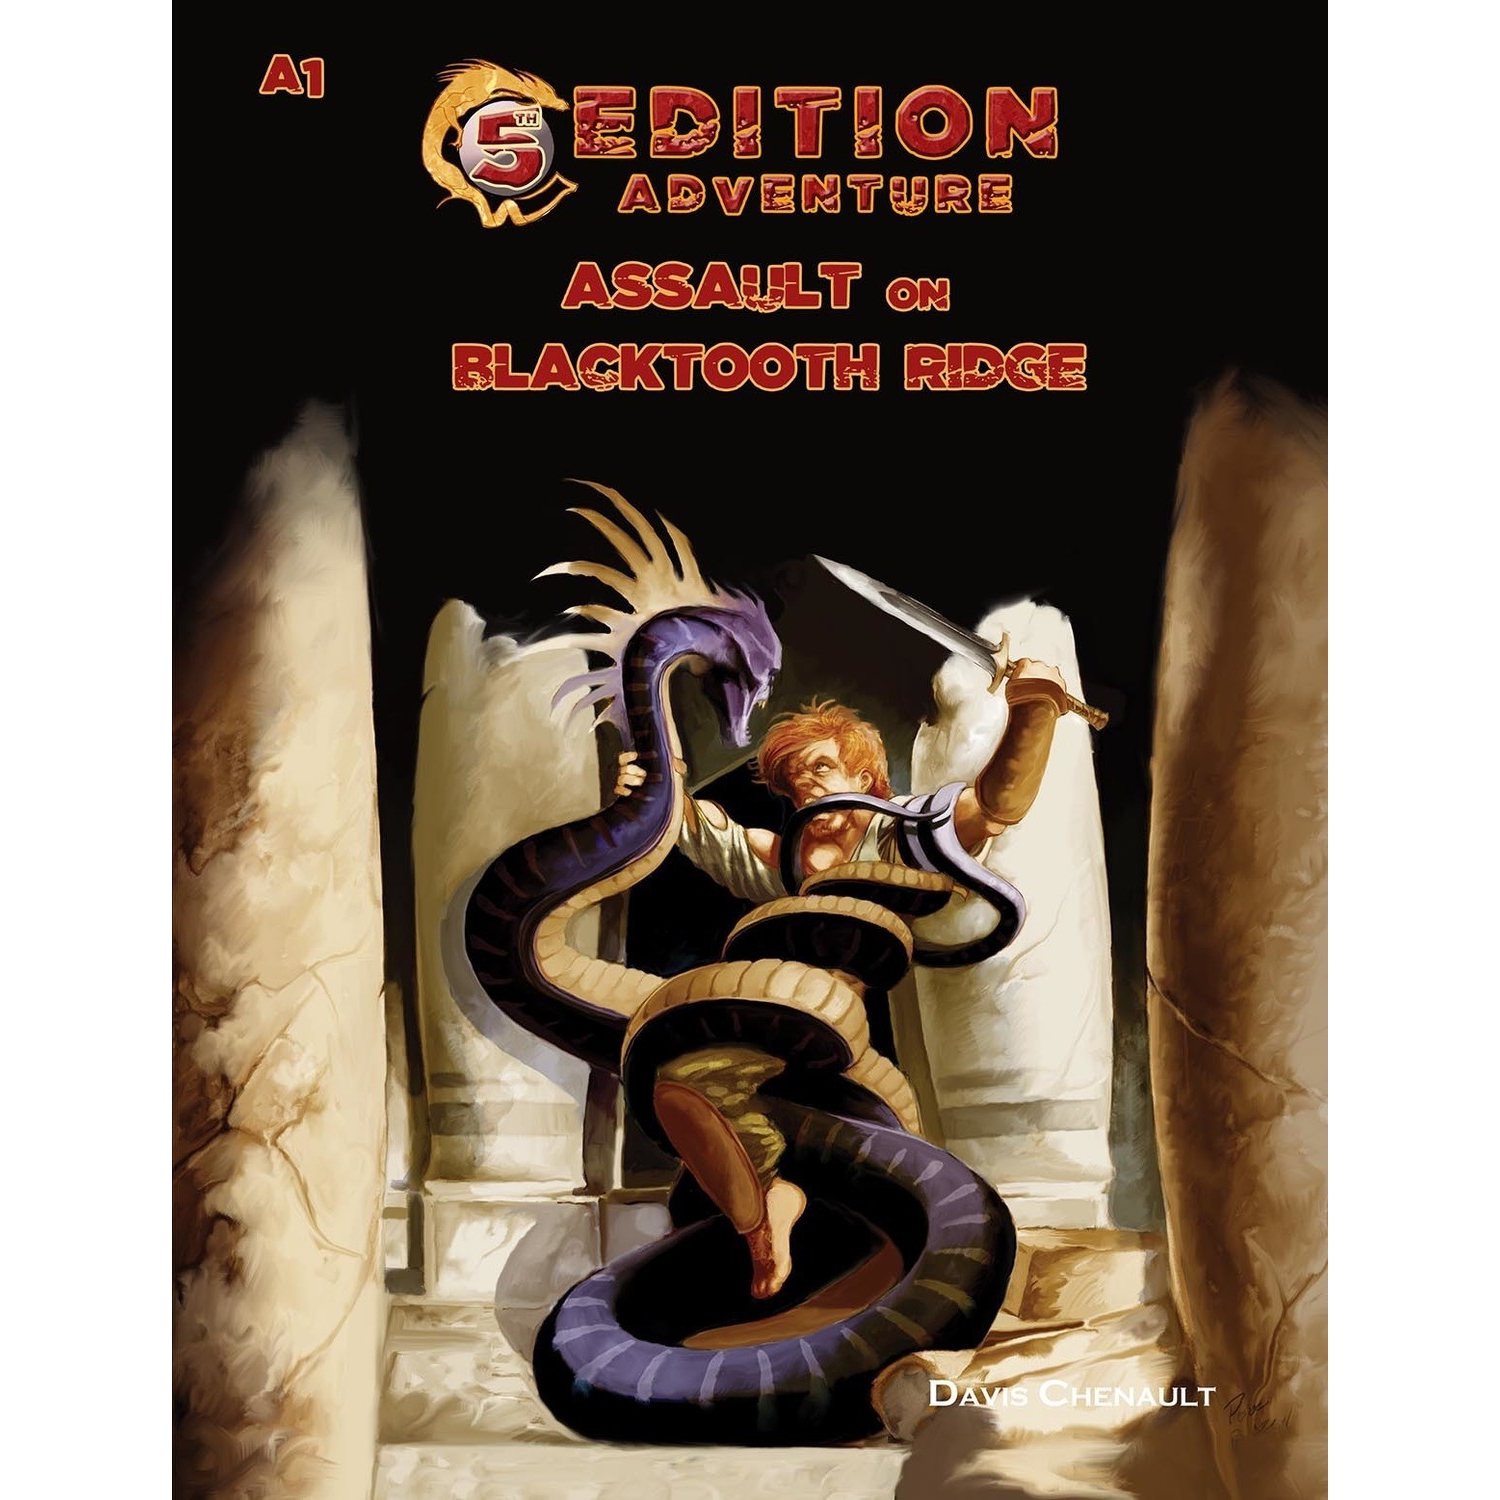 Troll Lord Games 5th Edition Adventure: A1 Assault on Blacktooth Ridge Soft Cover Book